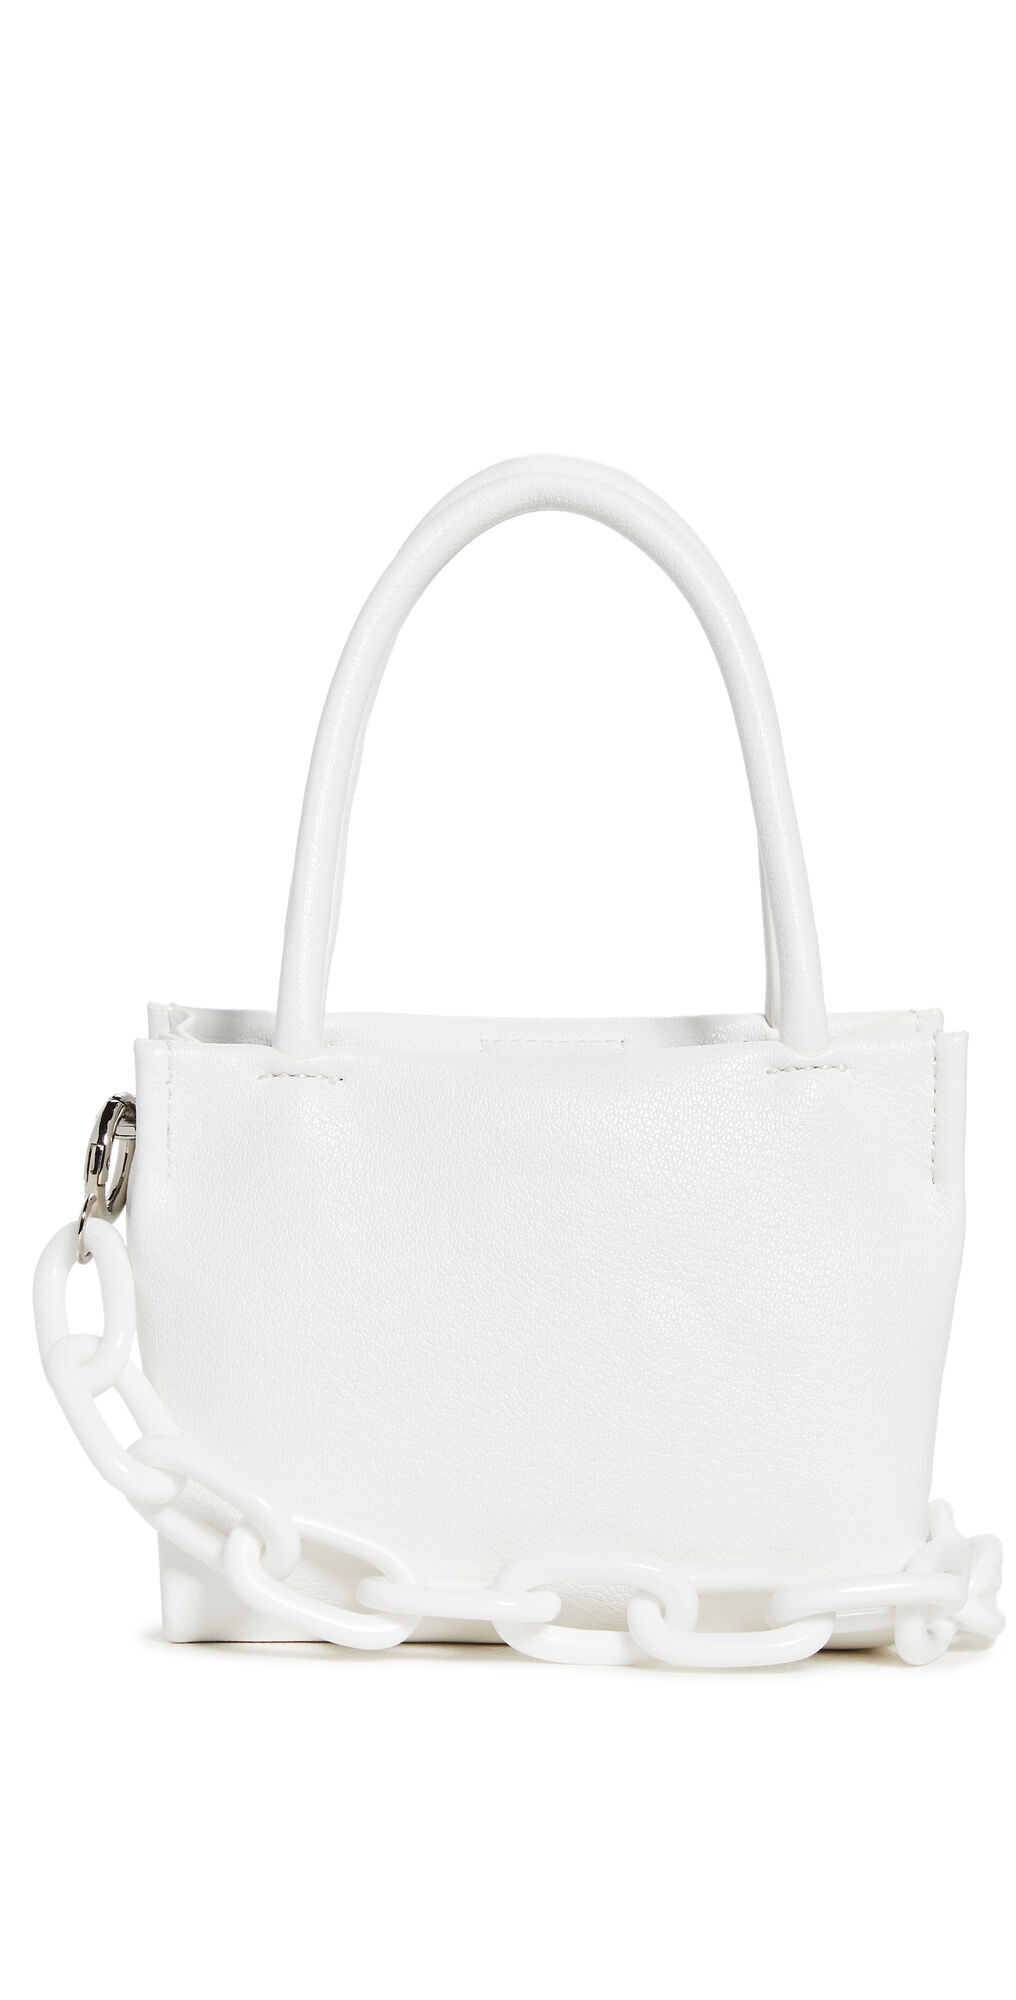 House of Want H.O.W. We Summer Mini Tote White One Size  White  size:One Size